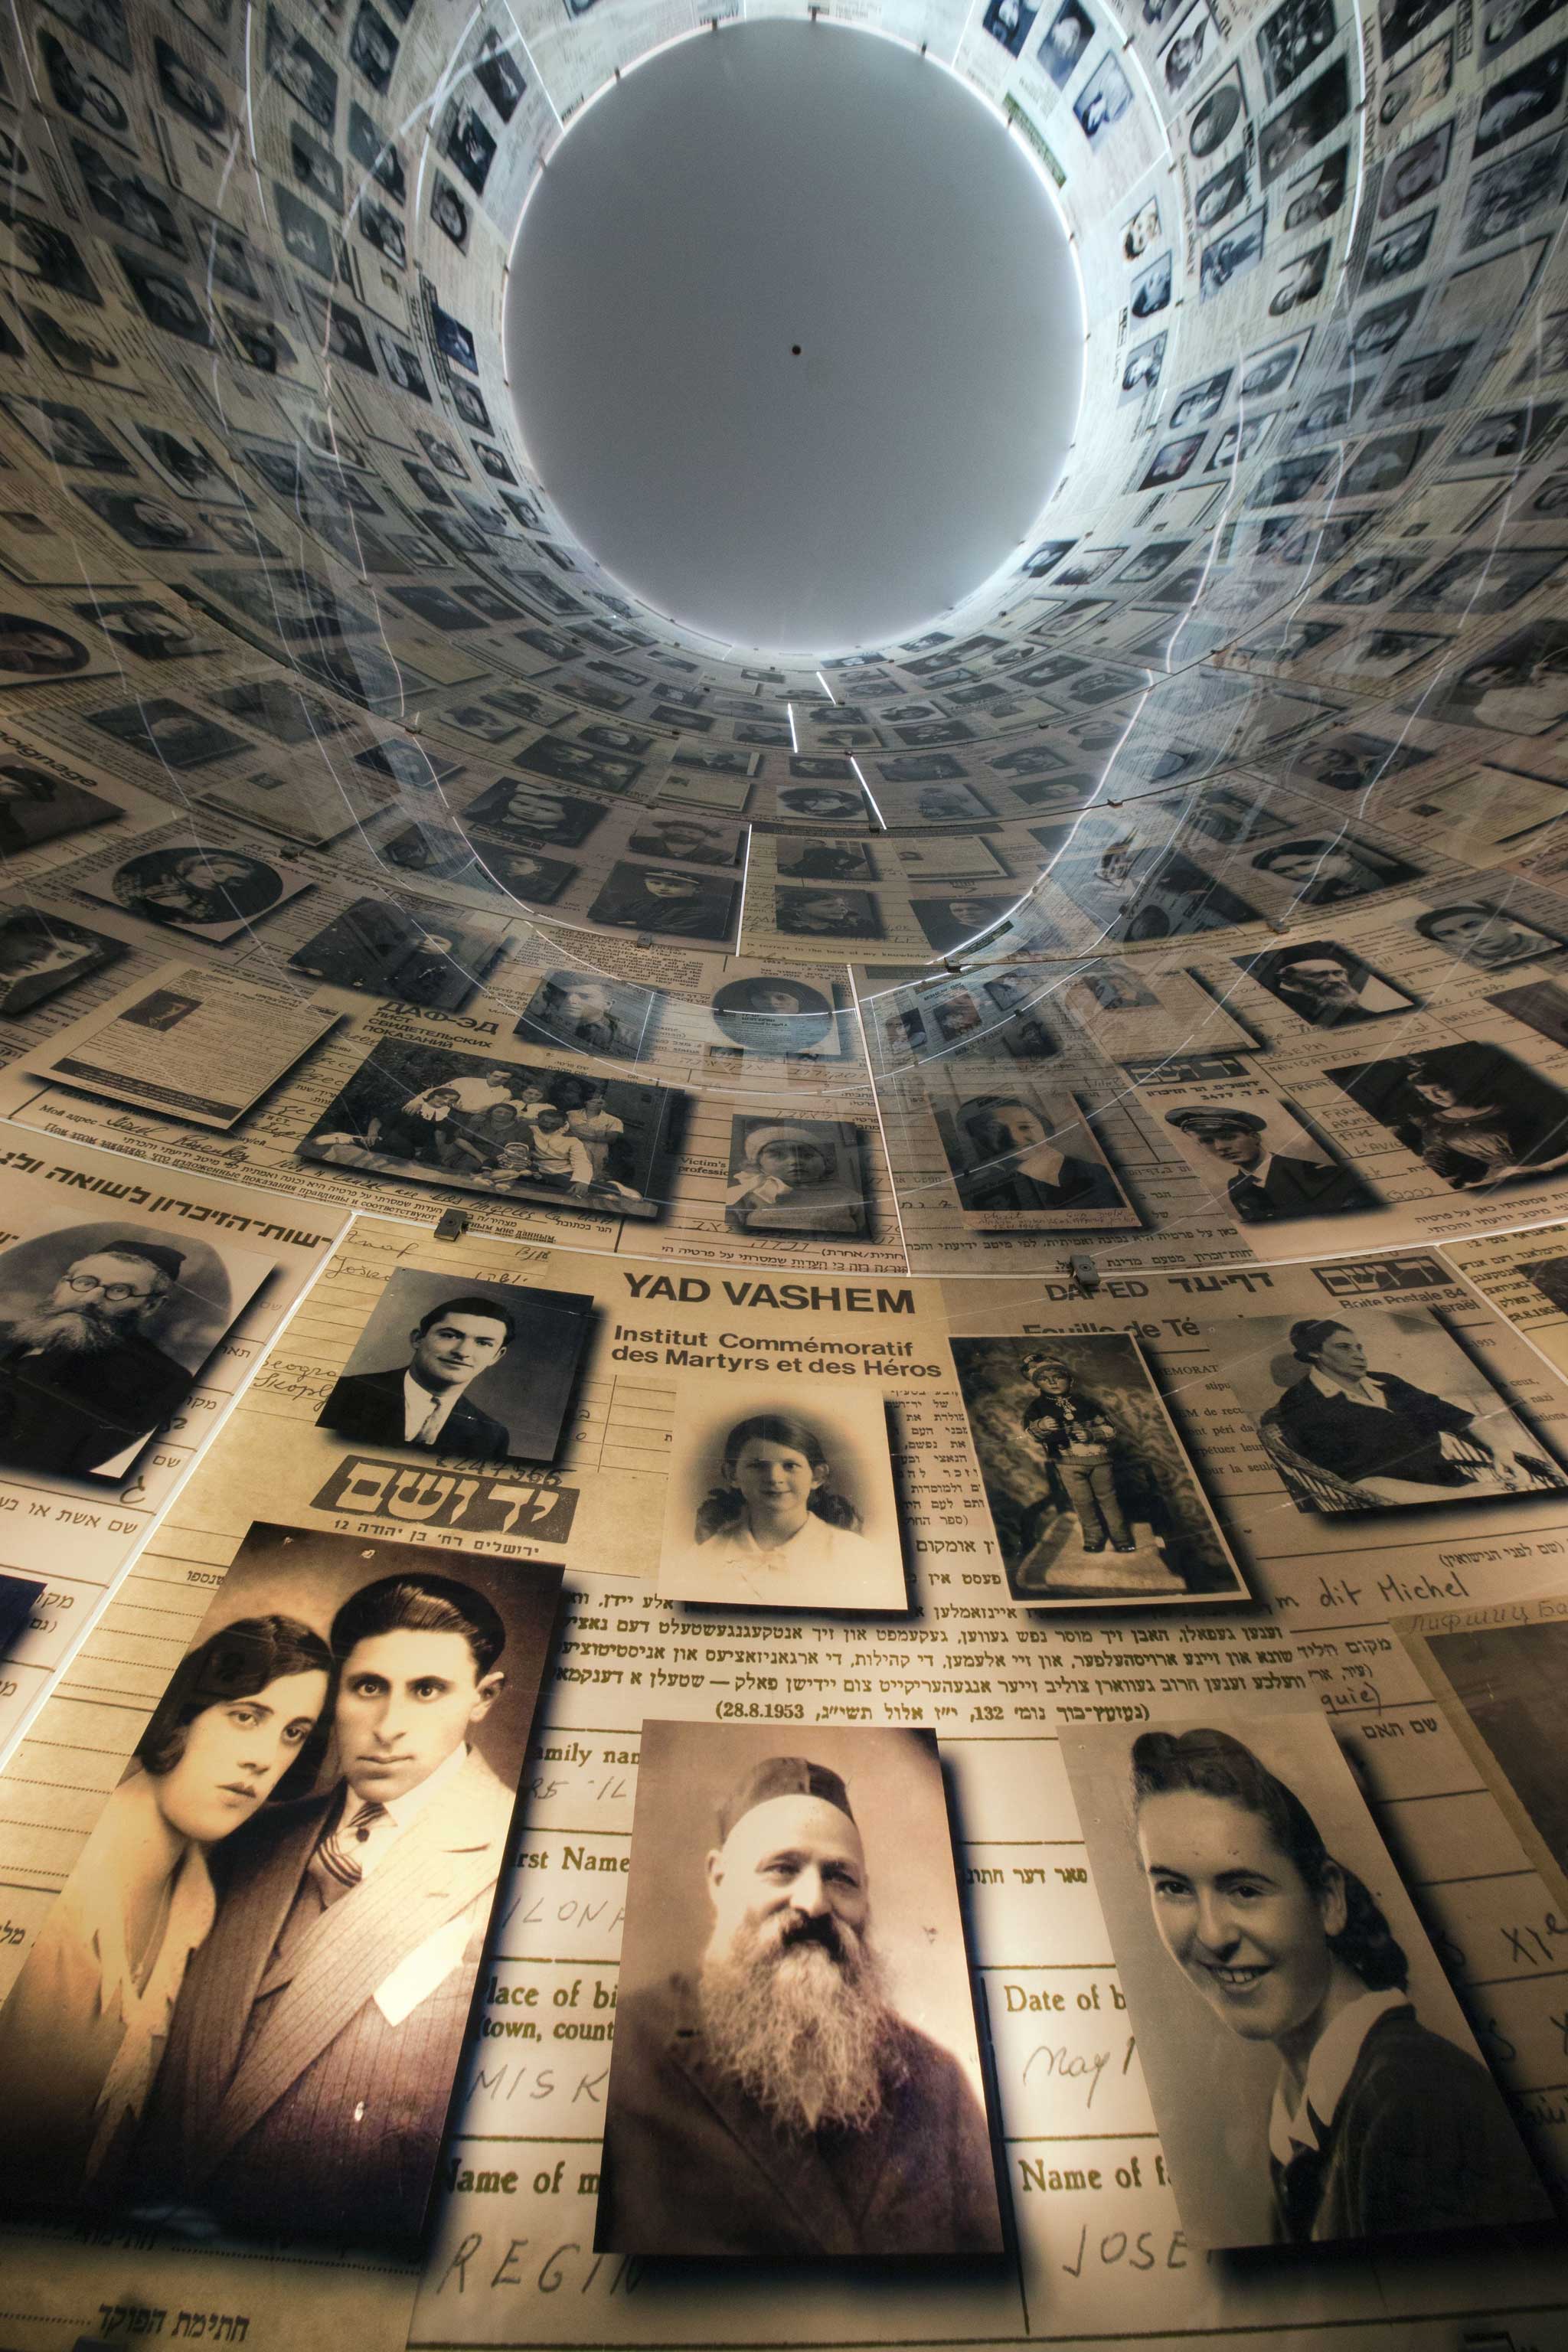 Memory well: every scrap of detail about Holocaust victims is kept at Yad Vashem